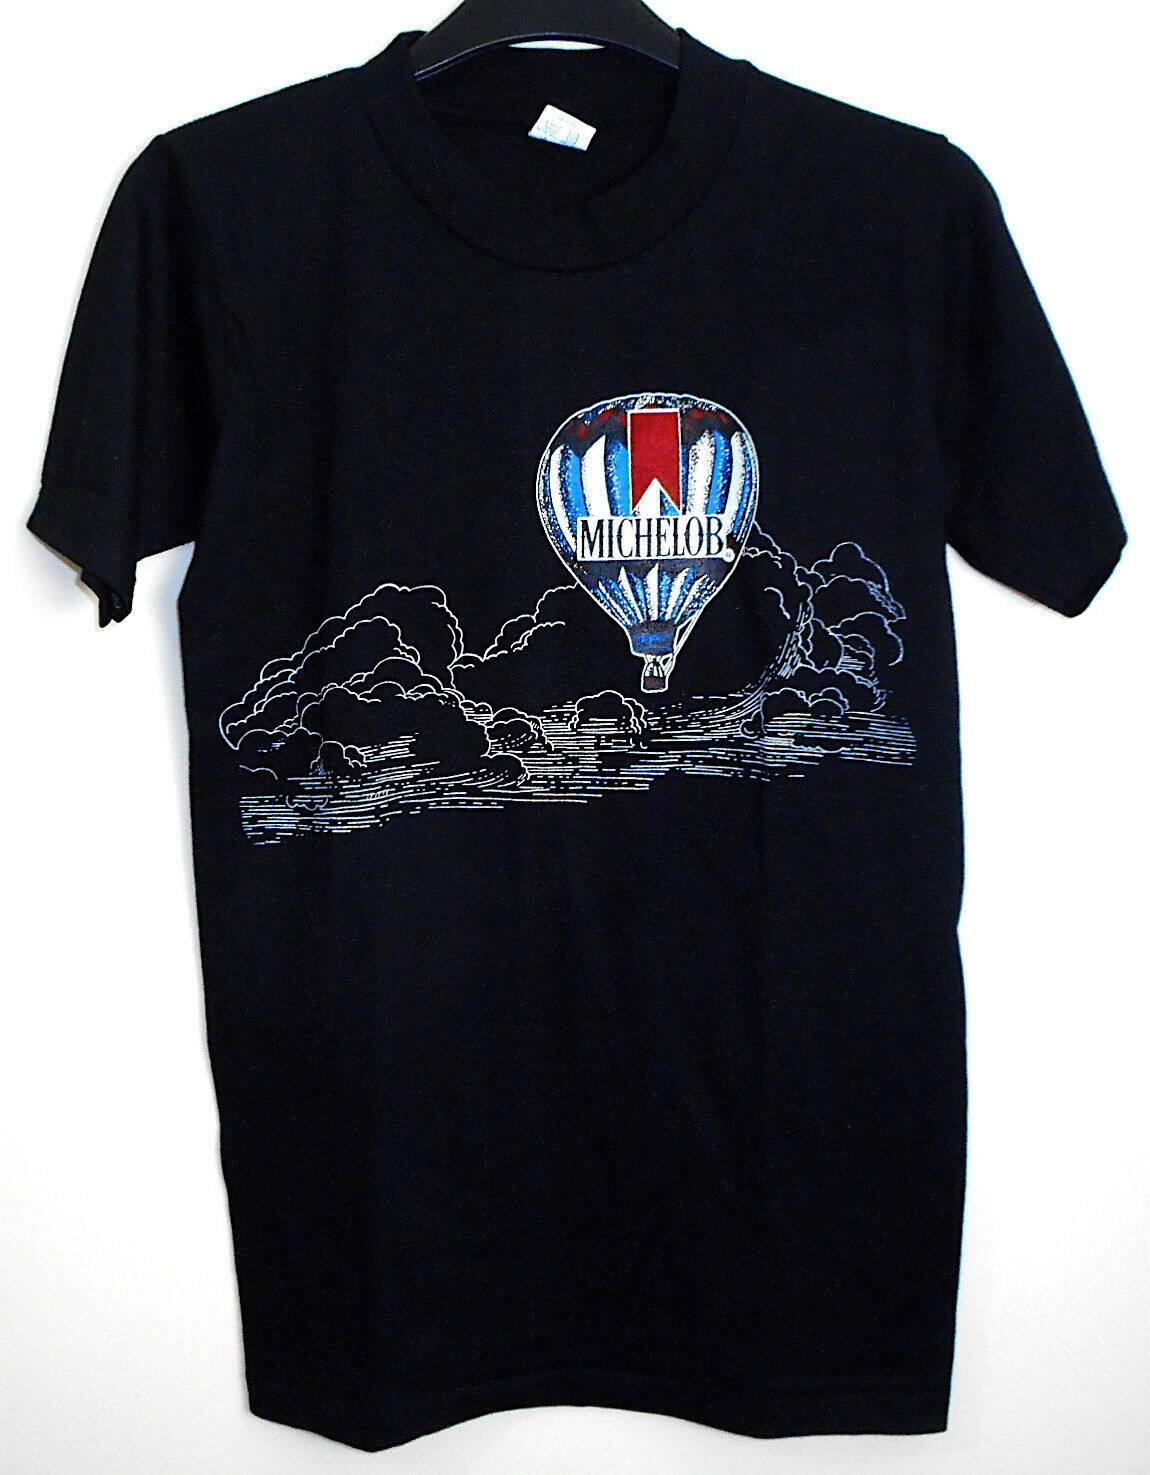 MICHELOB Hot Air Balloon Logo Vintage T Shirt Size Adult S (Small) NEW